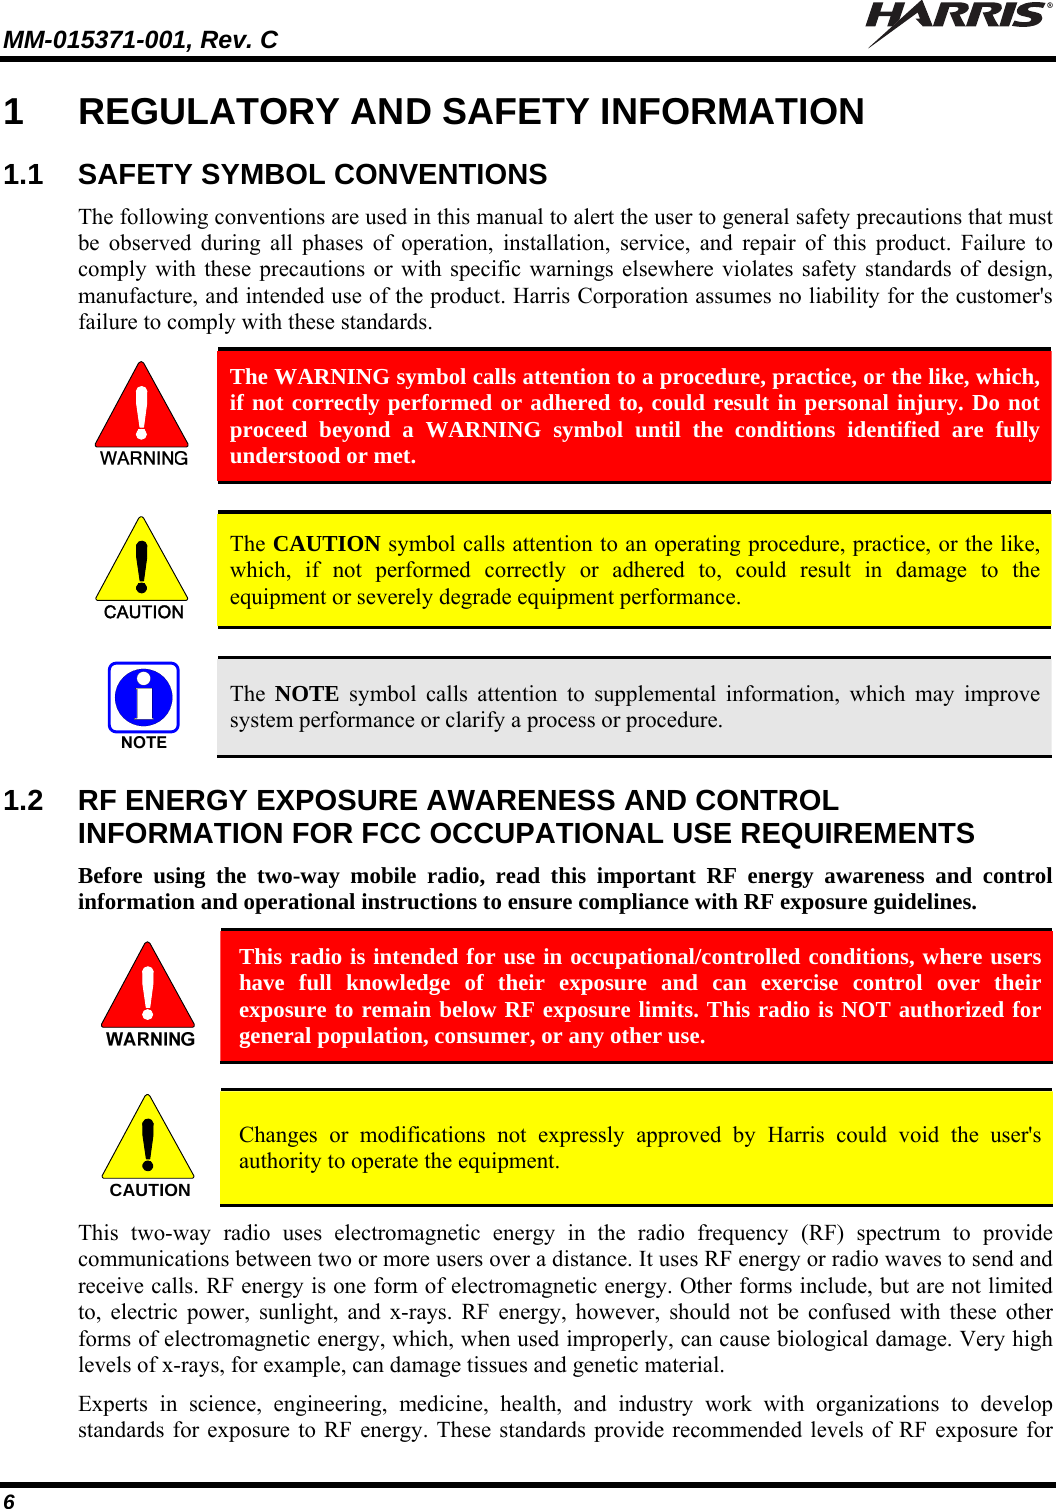 MM-015371-001, Rev. C   6 1  REGULATORY AND SAFETY INFORMATION 1.1  SAFETY SYMBOL CONVENTIONS The following conventions are used in this manual to alert the user to general safety precautions that must be observed during all phases of operation, installation, service, and repair of this product. Failure to comply with these precautions or with specific warnings elsewhere violates safety standards of design, manufacture, and intended use of the product. Harris Corporation assumes no liability for the customer&apos;s failure to comply with these standards.  The WARNING symbol calls attention to a procedure, practice, or the like, which, if not correctly performed or adhered to, could result in personal injury. Do not proceed beyond a WARNING symbol until the conditions identified are fully understood or met.   CAUTION  The CAUTION symbol calls attention to an operating procedure, practice, or the like, which, if not performed correctly or adhered to, could result in damage to the equipment or severely degrade equipment performance.    The  NOTE symbol calls attention to supplemental information, which may improve system performance or clarify a process or procedure. 1.2  RF ENERGY EXPOSURE AWARENESS AND CONTROL INFORMATION FOR FCC OCCUPATIONAL USE REQUIREMENTS Before using the two-way mobile radio, read this important RF energy awareness and control information and operational instructions to ensure compliance with RF exposure guidelines.  This radio is intended for use in occupational/controlled conditions, where users have full knowledge of their exposure and can exercise control over their exposure to remain below RF exposure limits. This radio is NOT authorized for general population, consumer, or any other use.  CAUTION  Changes or modifications not expressly approved by Harris could void the user&apos;s authority to operate the equipment. This two-way radio uses electromagnetic energy in the radio frequency (RF) spectrum to provide communications between two or more users over a distance. It uses RF energy or radio waves to send and receive calls. RF energy is one form of electromagnetic energy. Other forms include, but are not limited to, electric power, sunlight, and x-rays. RF energy, however, should not be confused with these other forms of electromagnetic energy, which, when used improperly, can cause biological damage. Very high levels of x-rays, for example, can damage tissues and genetic material. Experts in science, engineering, medicine, health, and industry work with organizations to develop standards for exposure to RF energy. These standards provide recommended levels of RF exposure for 